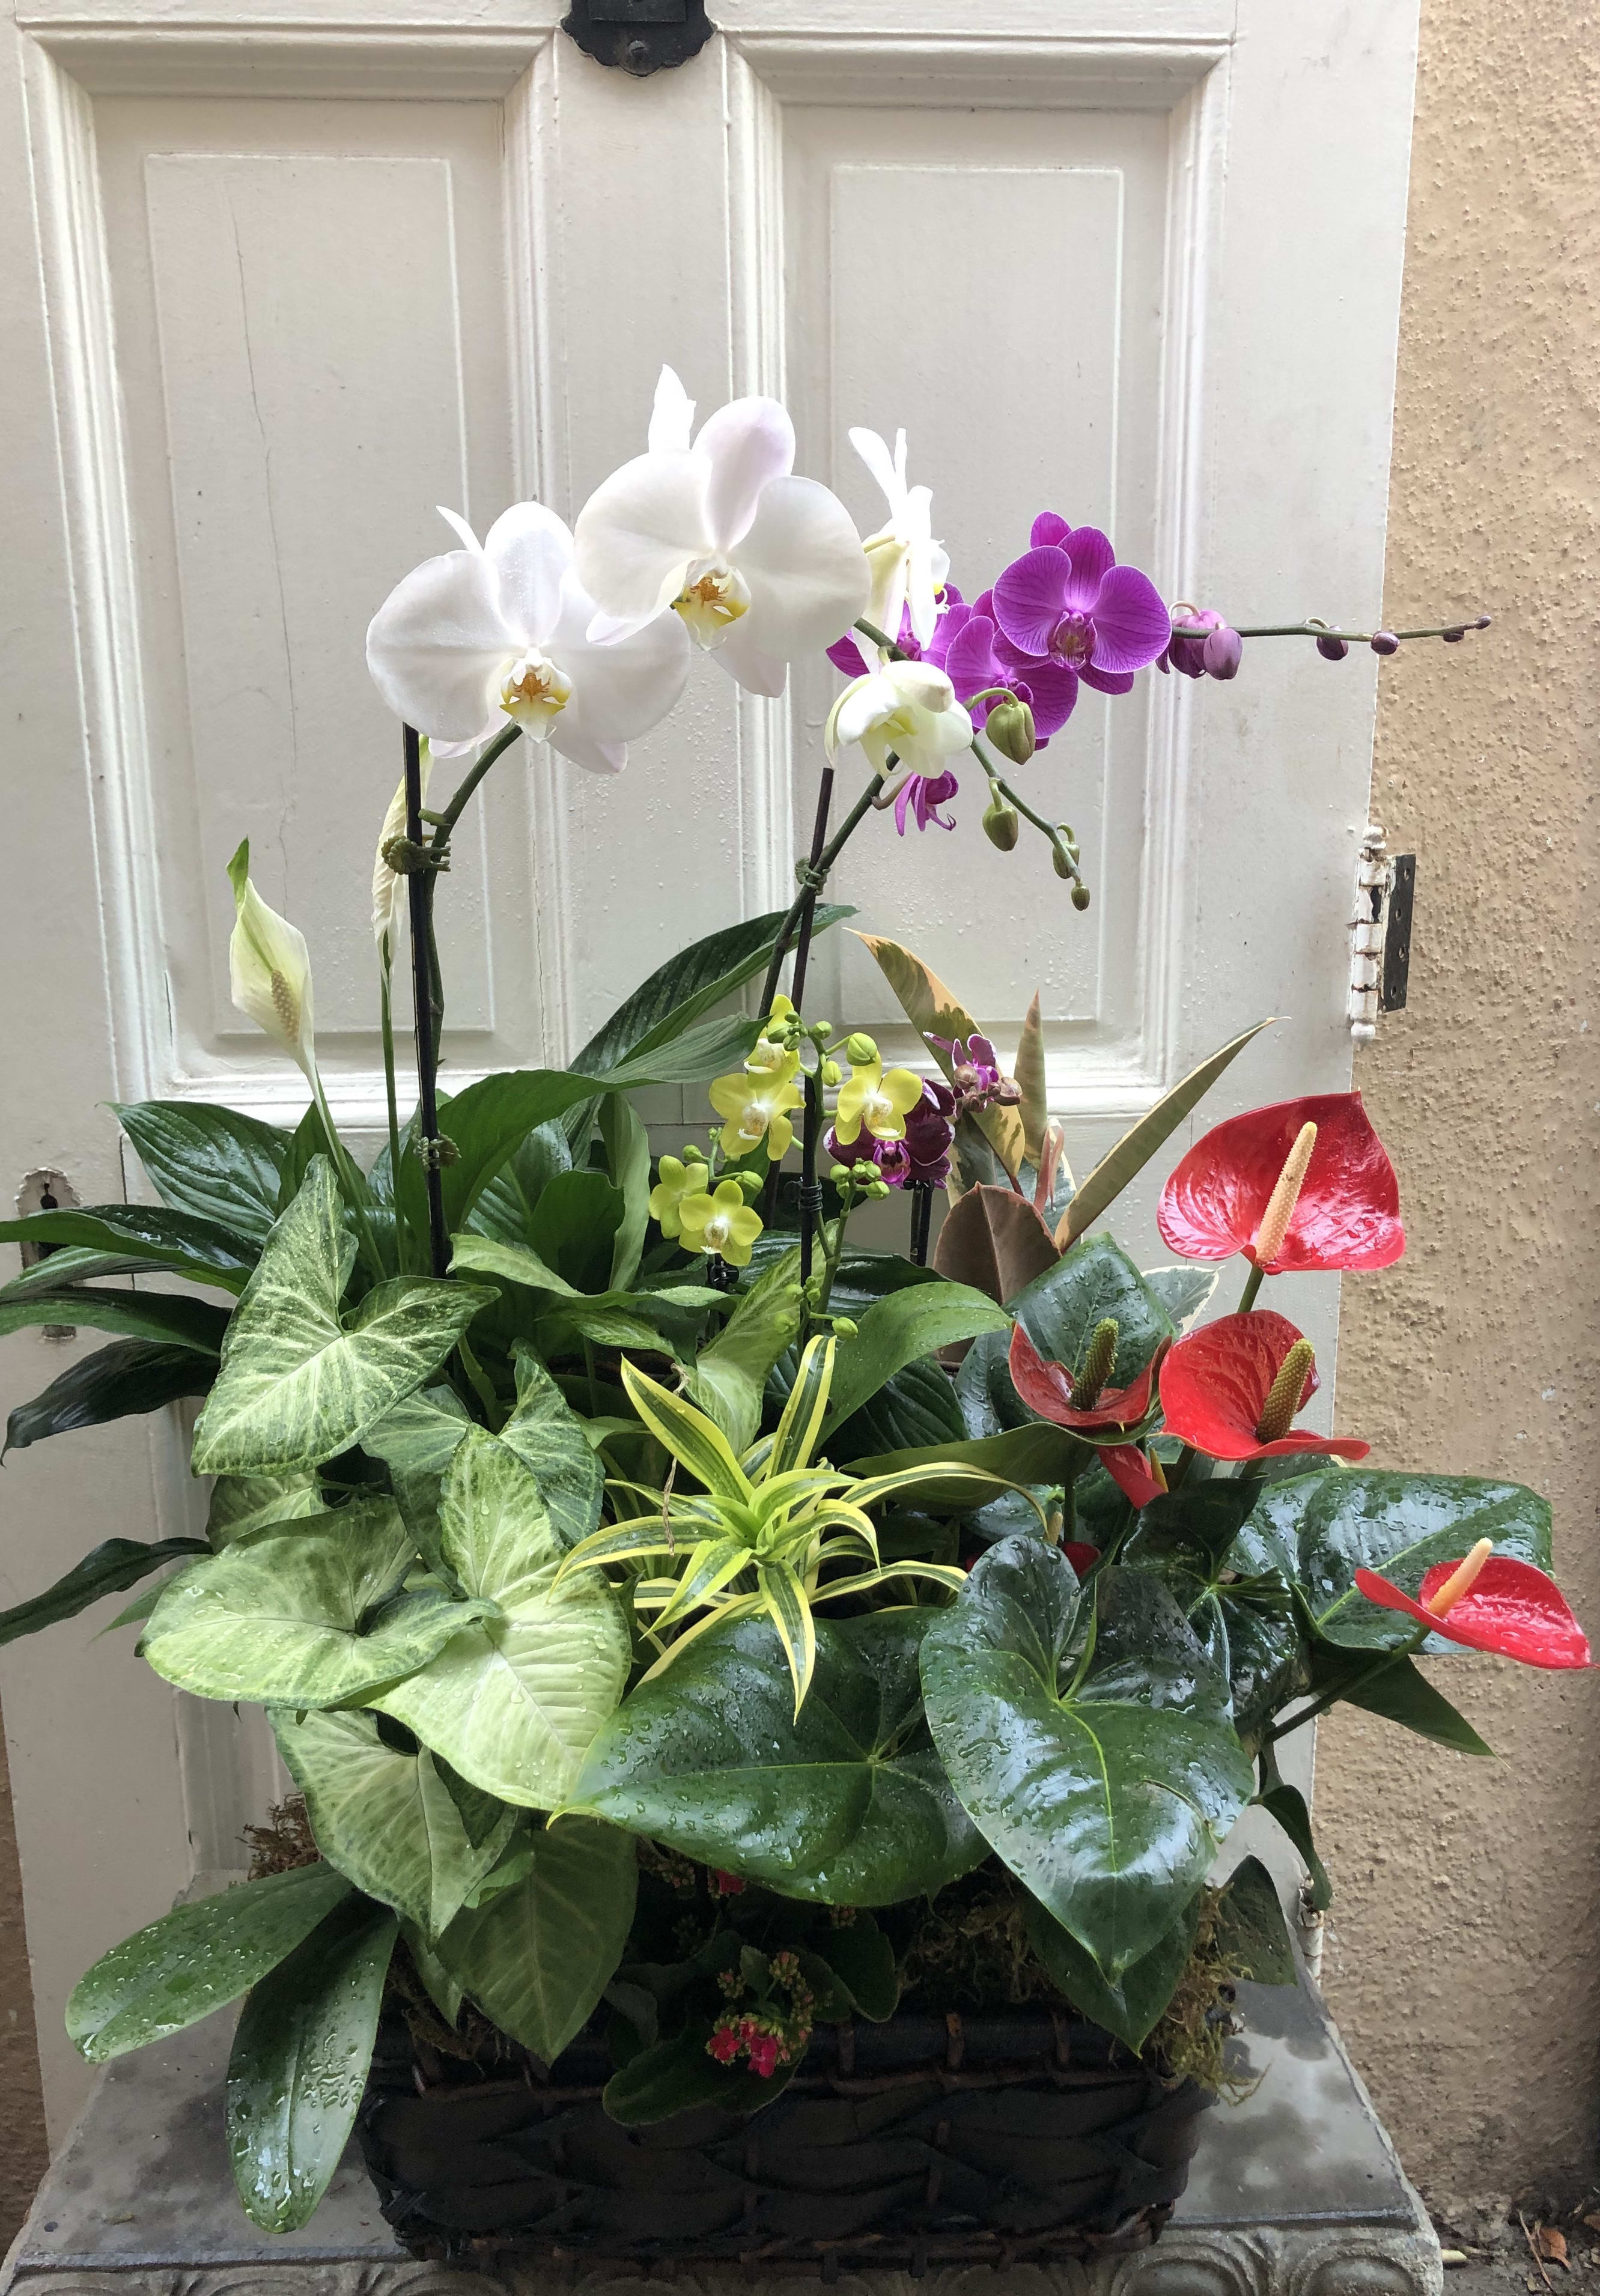 Nature’s Delight - Our large orchid planters contain a mix of lush tropical plants, orchids and either antherium or bromeliad. Talk about making a statement!